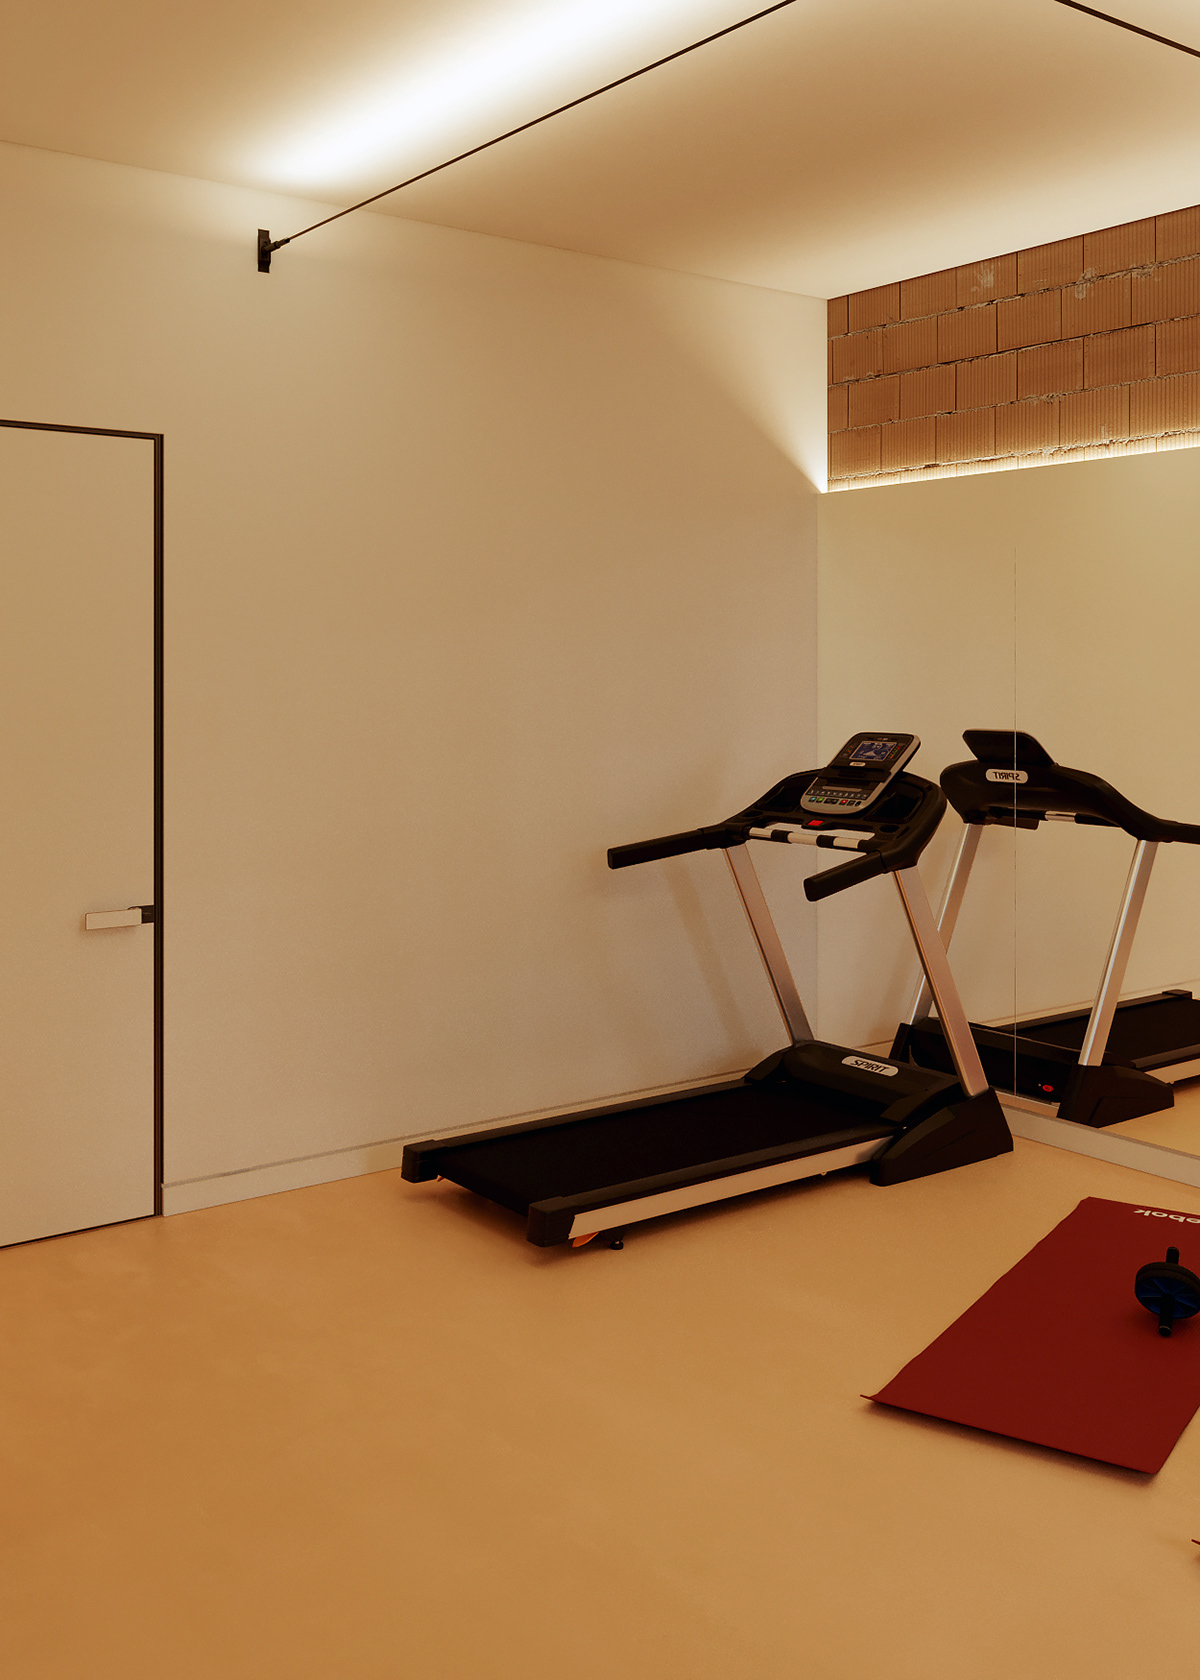 This enclosed space ensures privacy while in use and doing exercise.